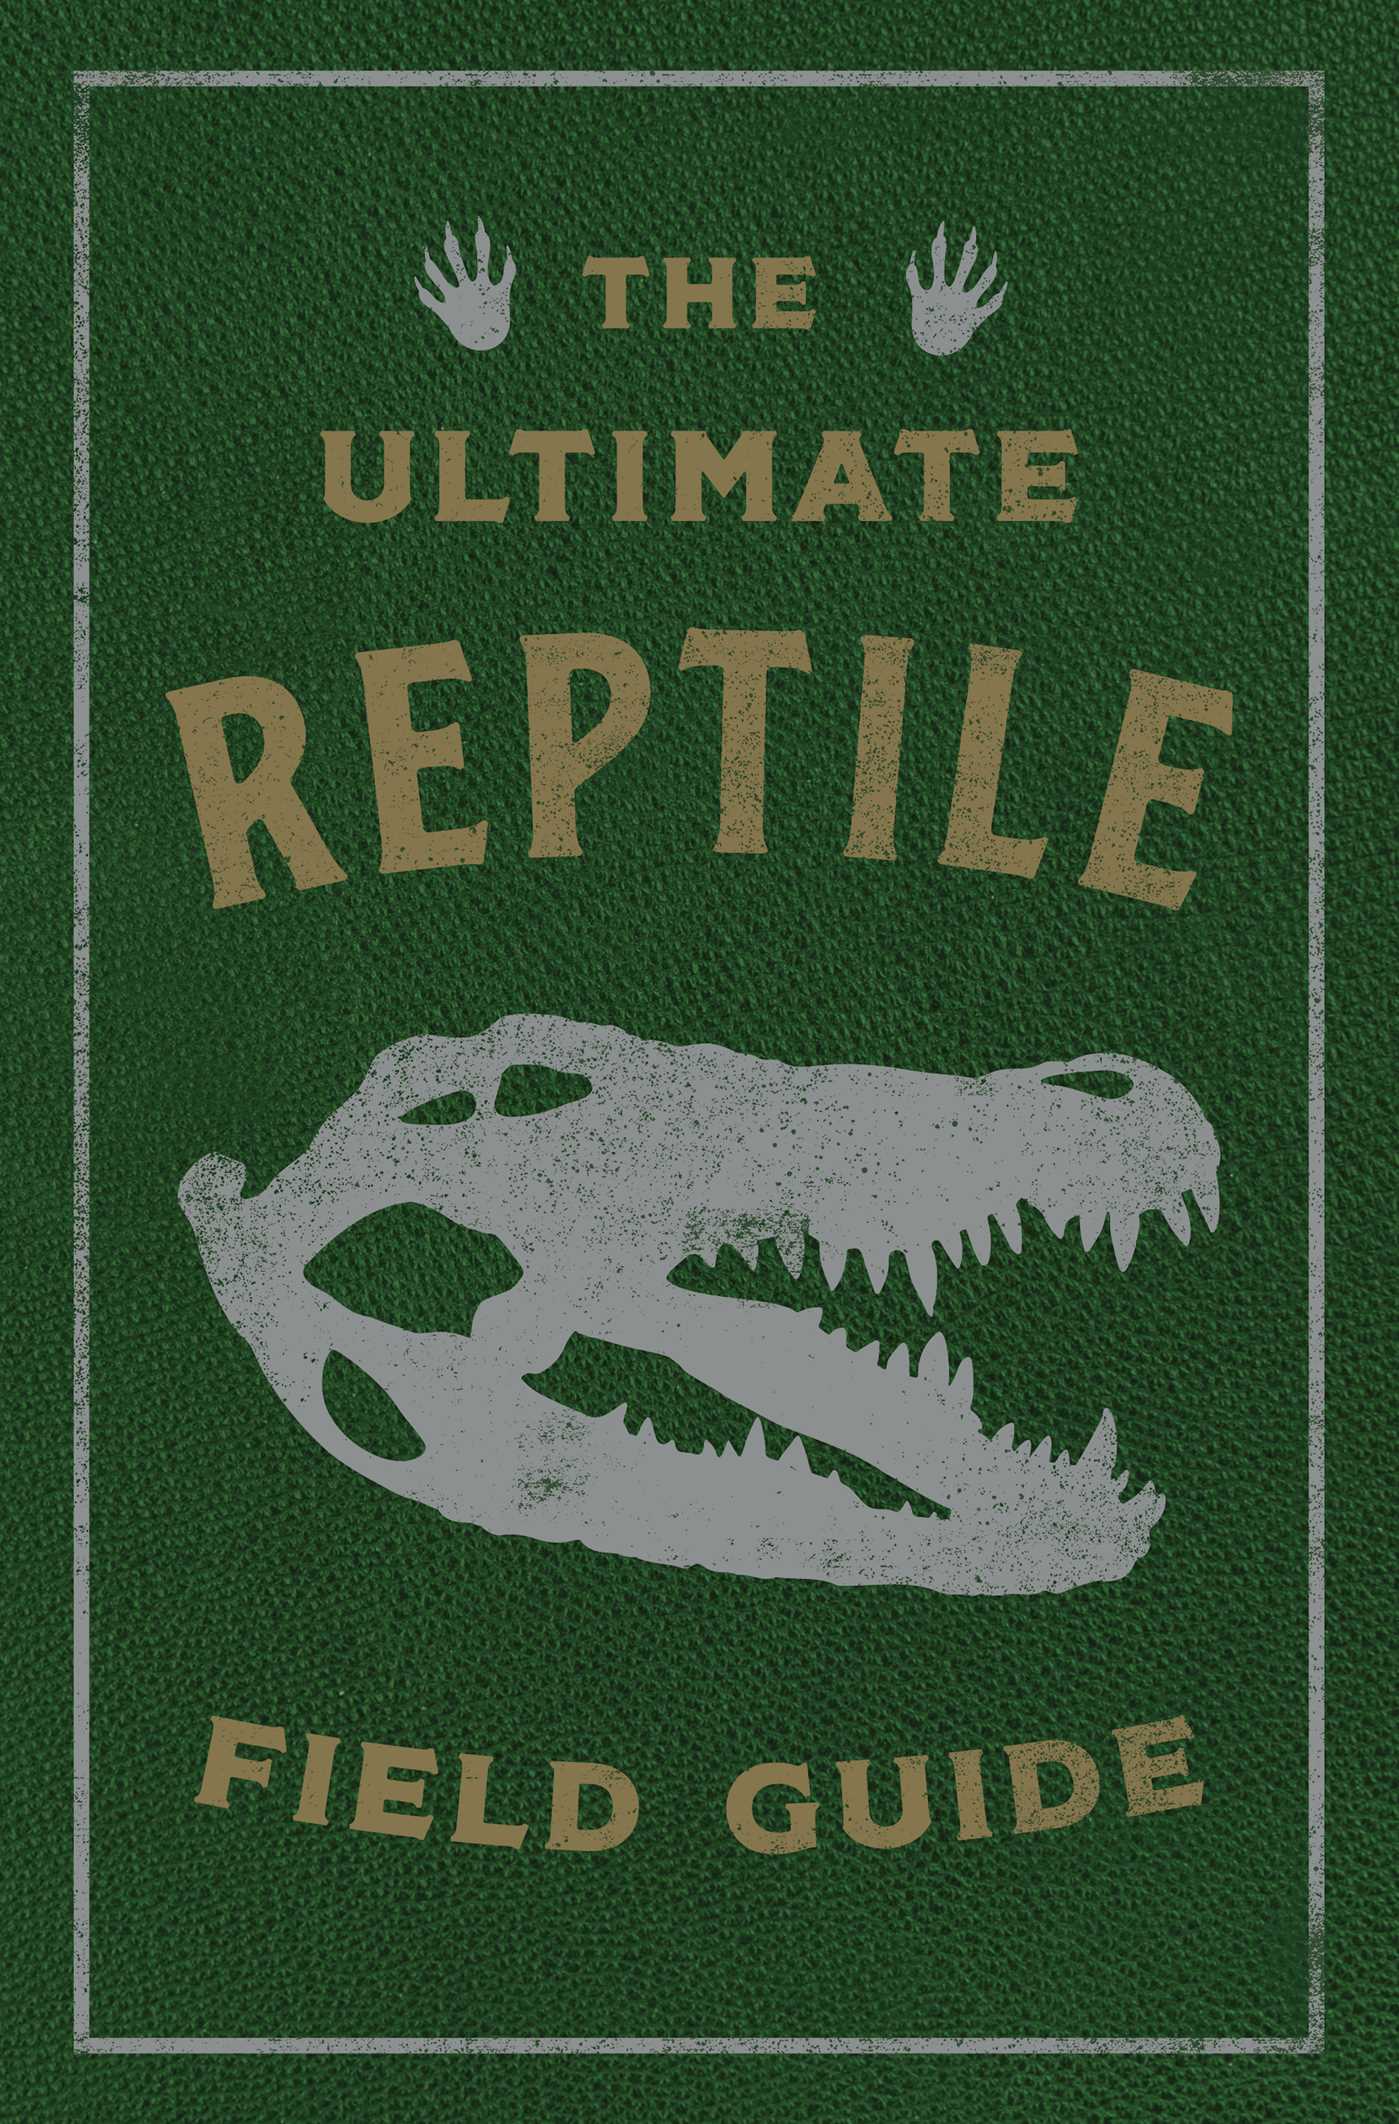 The Ultimate Reptile Field Guide: The Herpetologist's Handbook